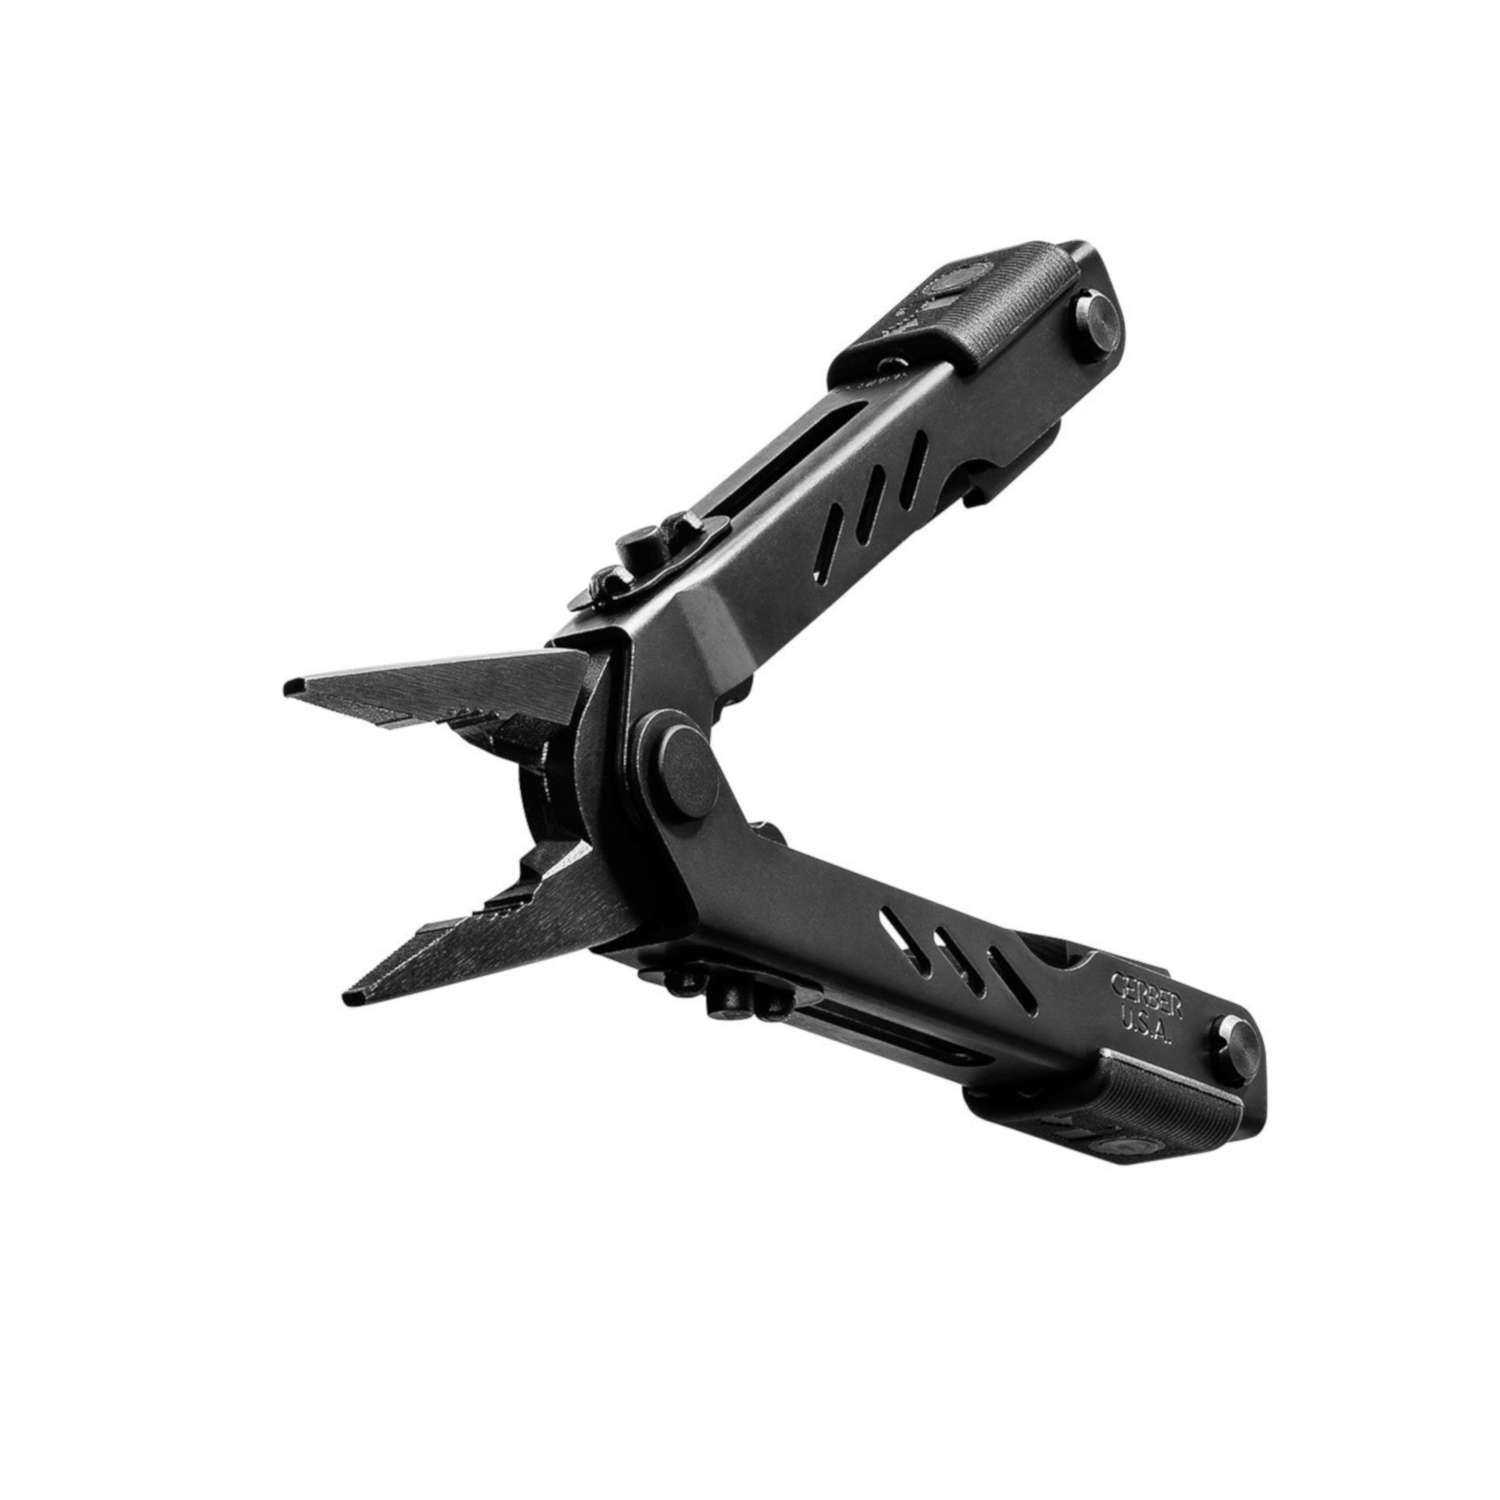 Gerber Fishing and Angling Plier 7.5 in. - Ace Hardware